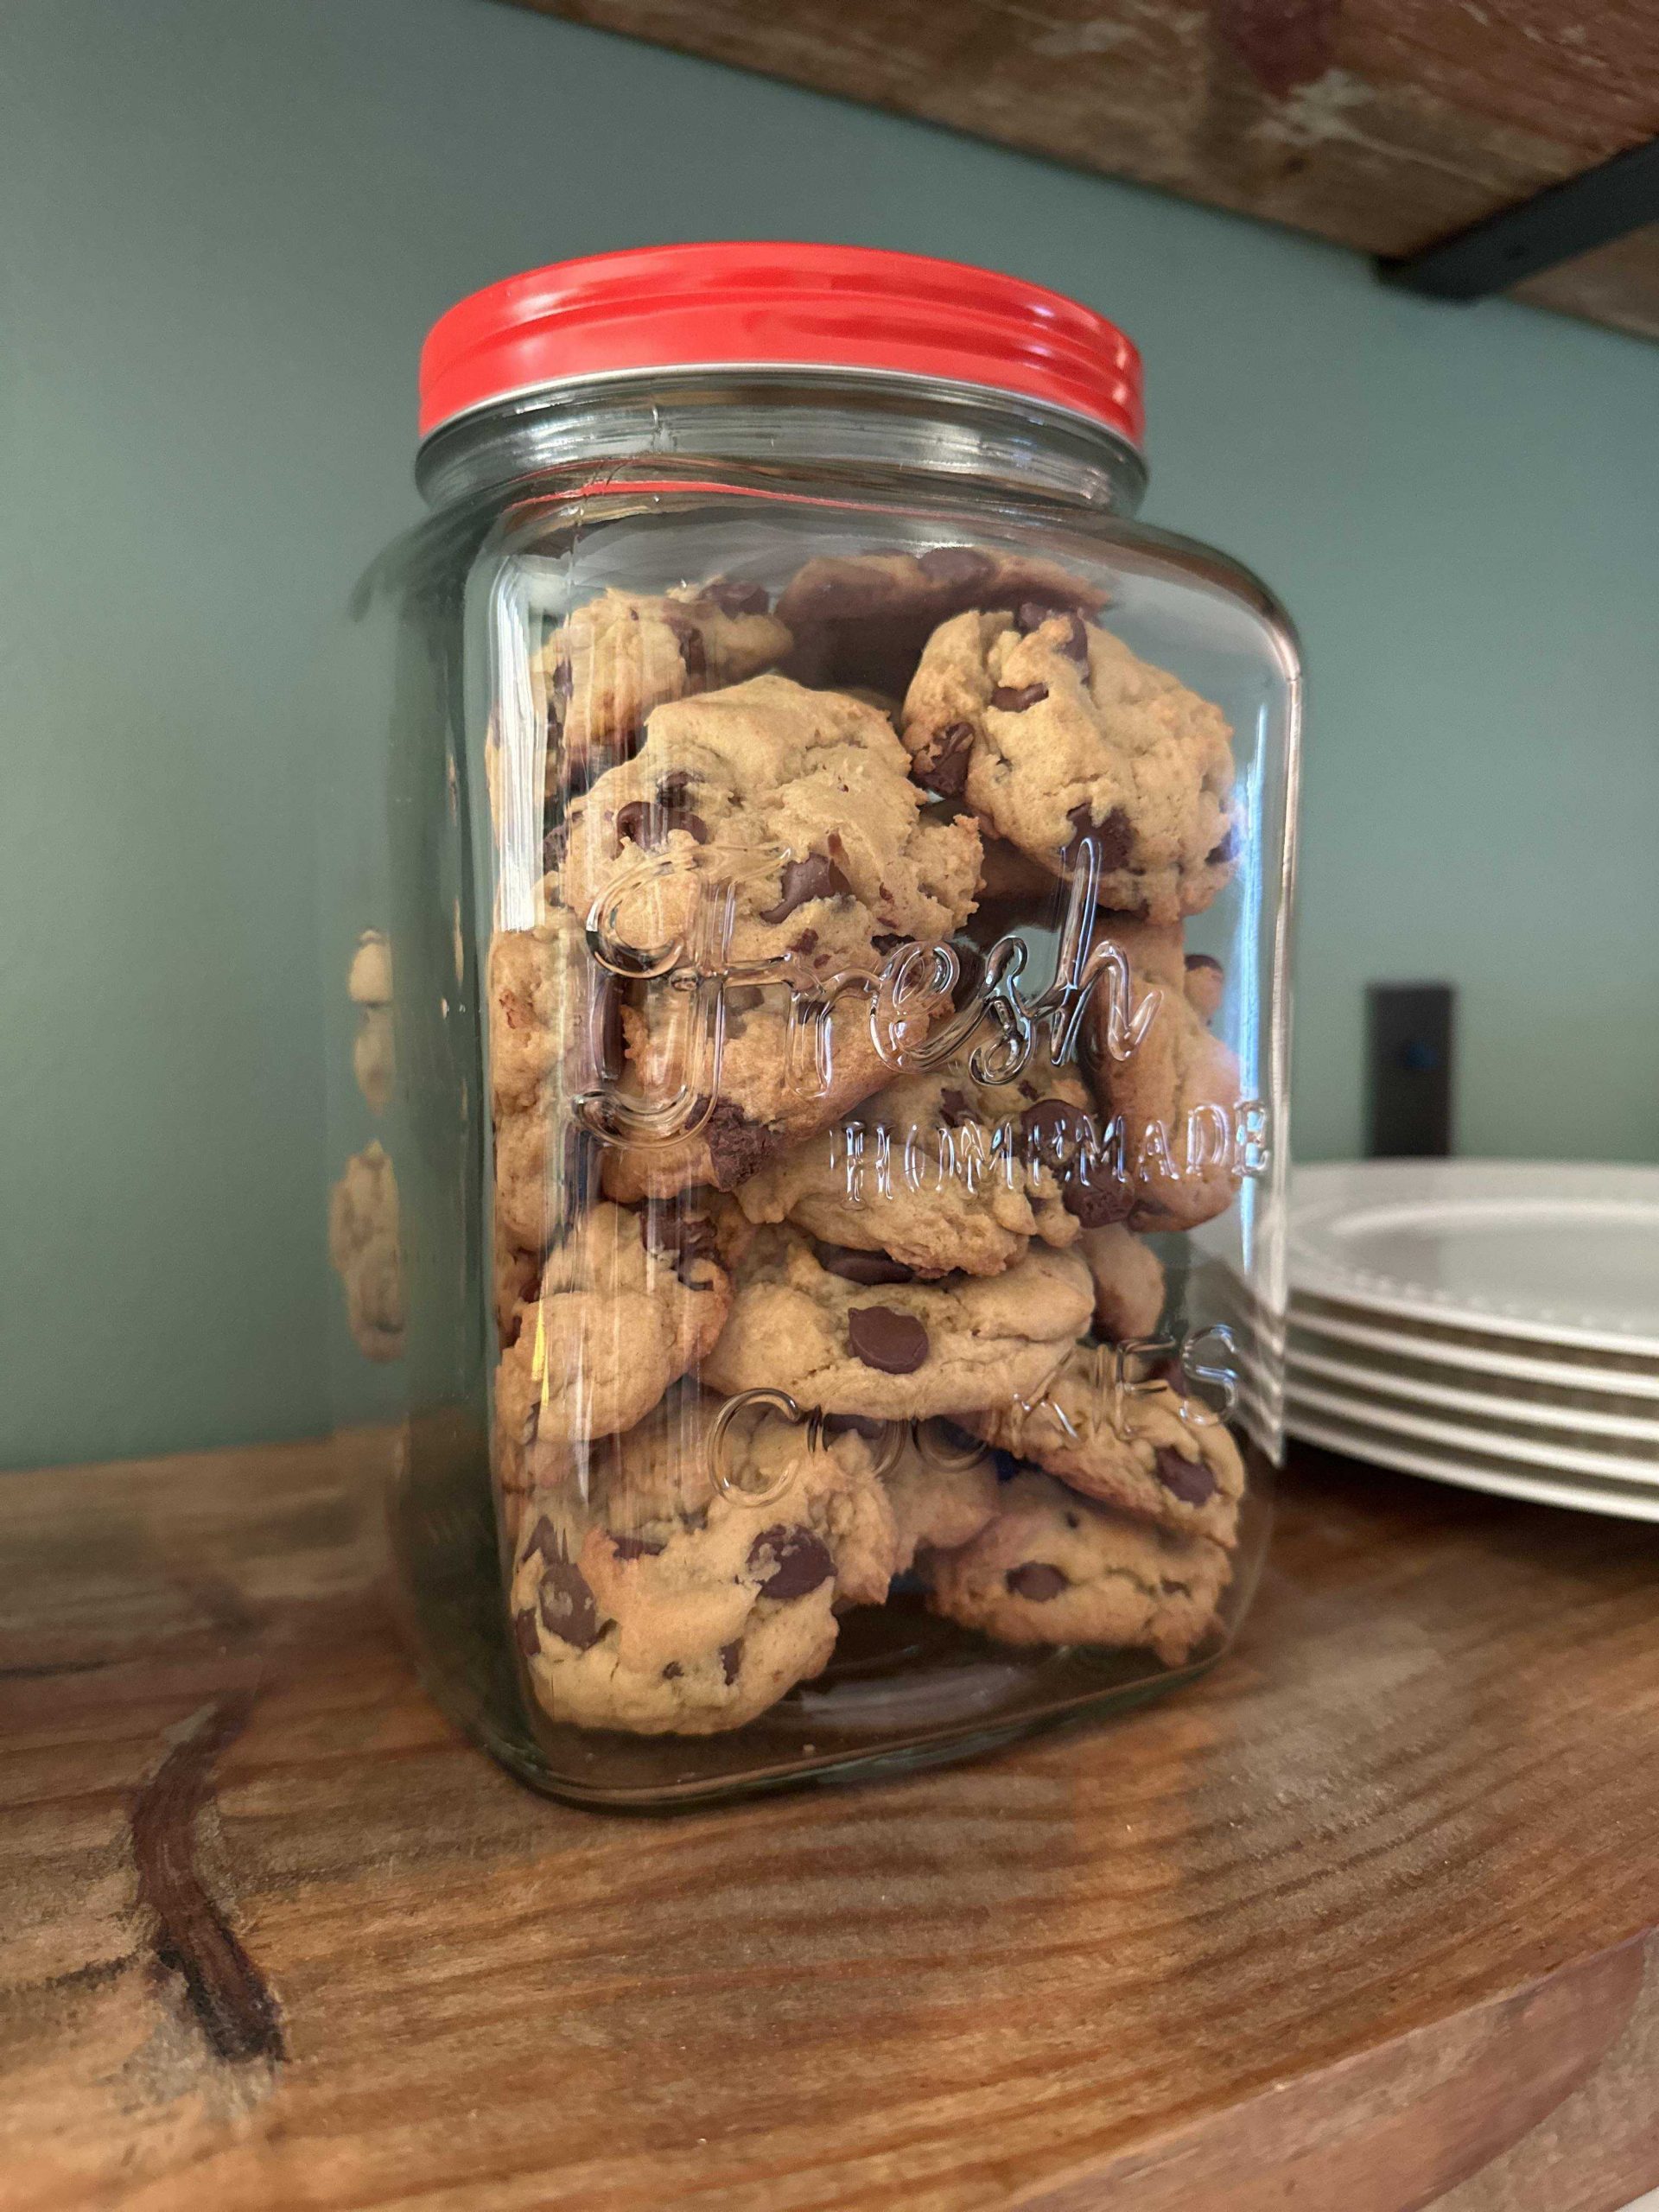 The ONLY Chocolate Chip Cookie Recipe You Need